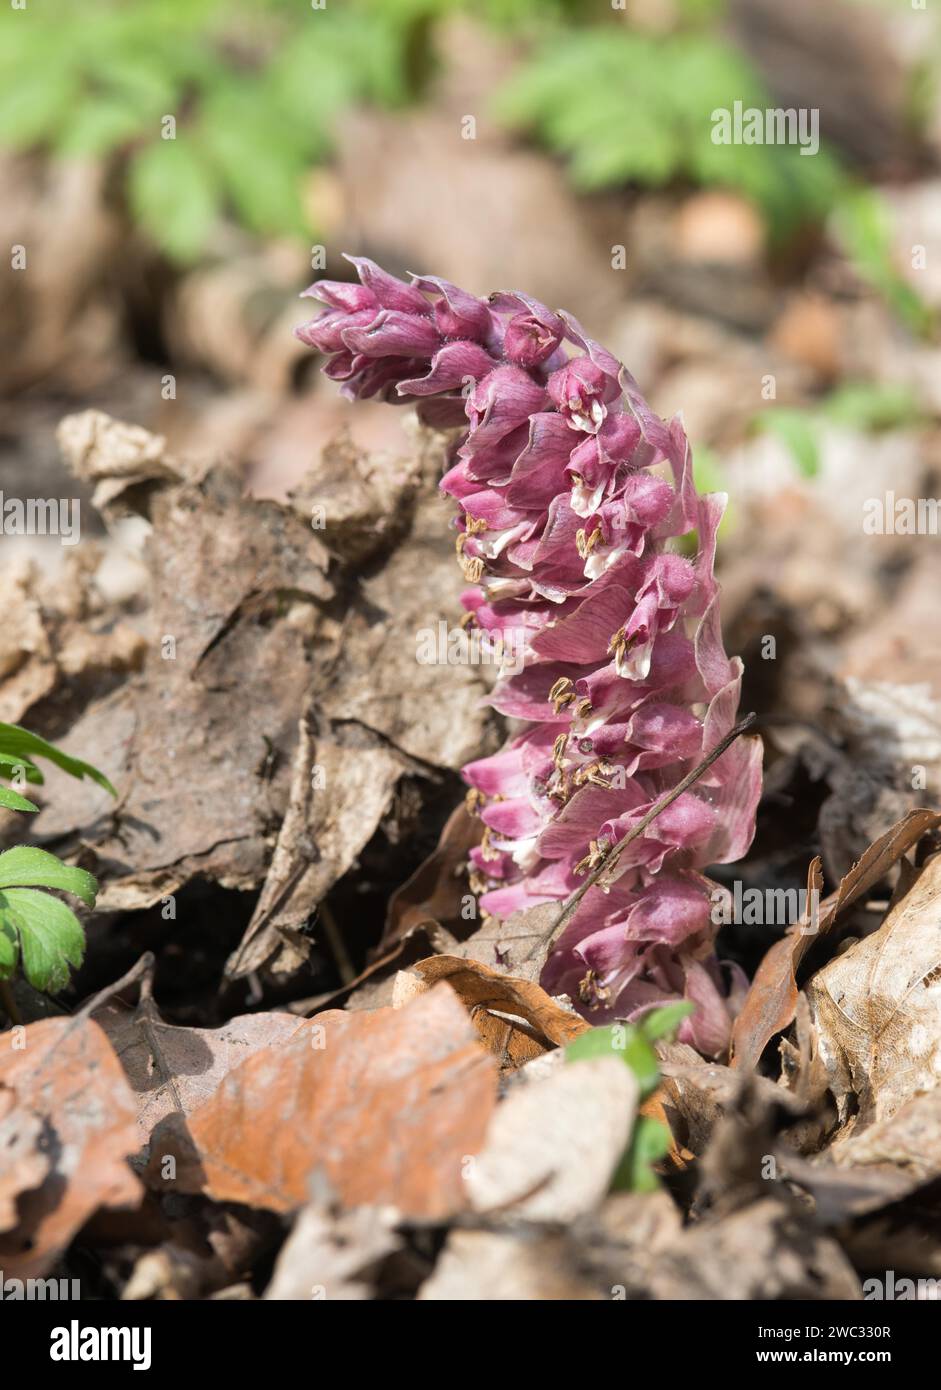 Common toothwort (Lathraea squamaria), flower on forest floor between old autumn leaves, geophyte, early bloomer, parasitic plant, parasite, macro Stock Photo